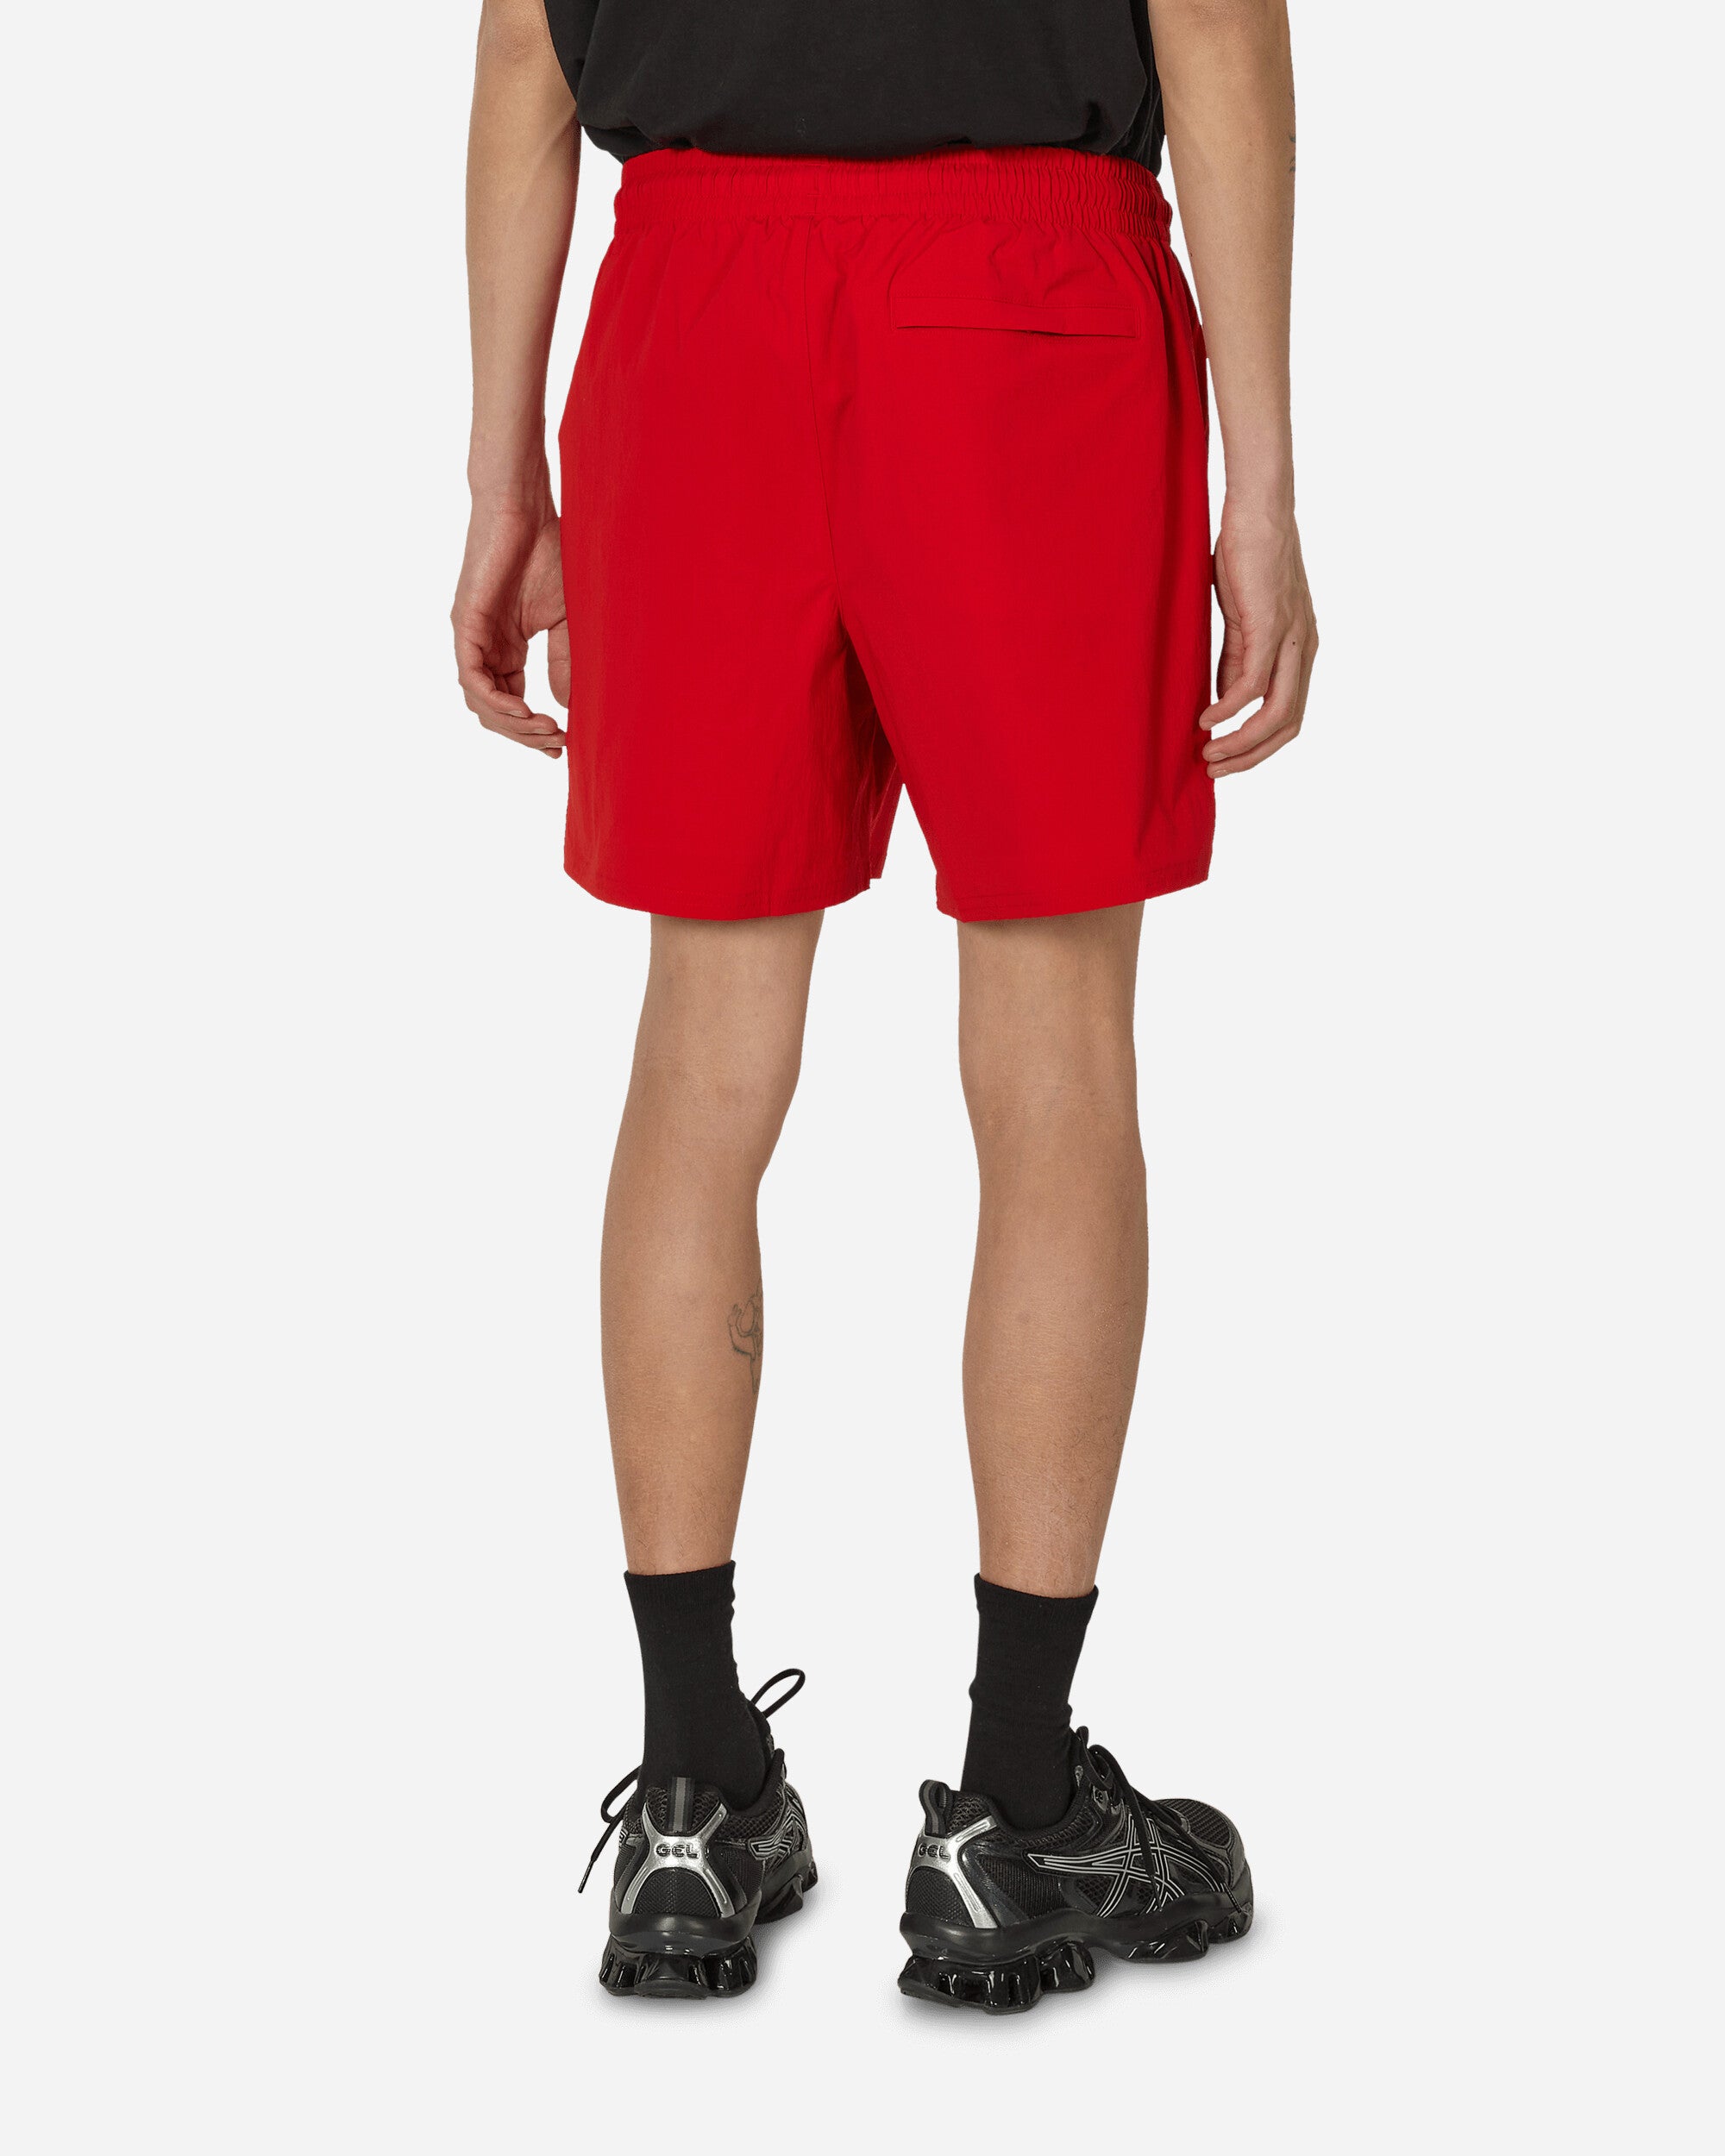 New Balance Archive Stretch Woven Short Team Red Shorts Short MS33550TRE